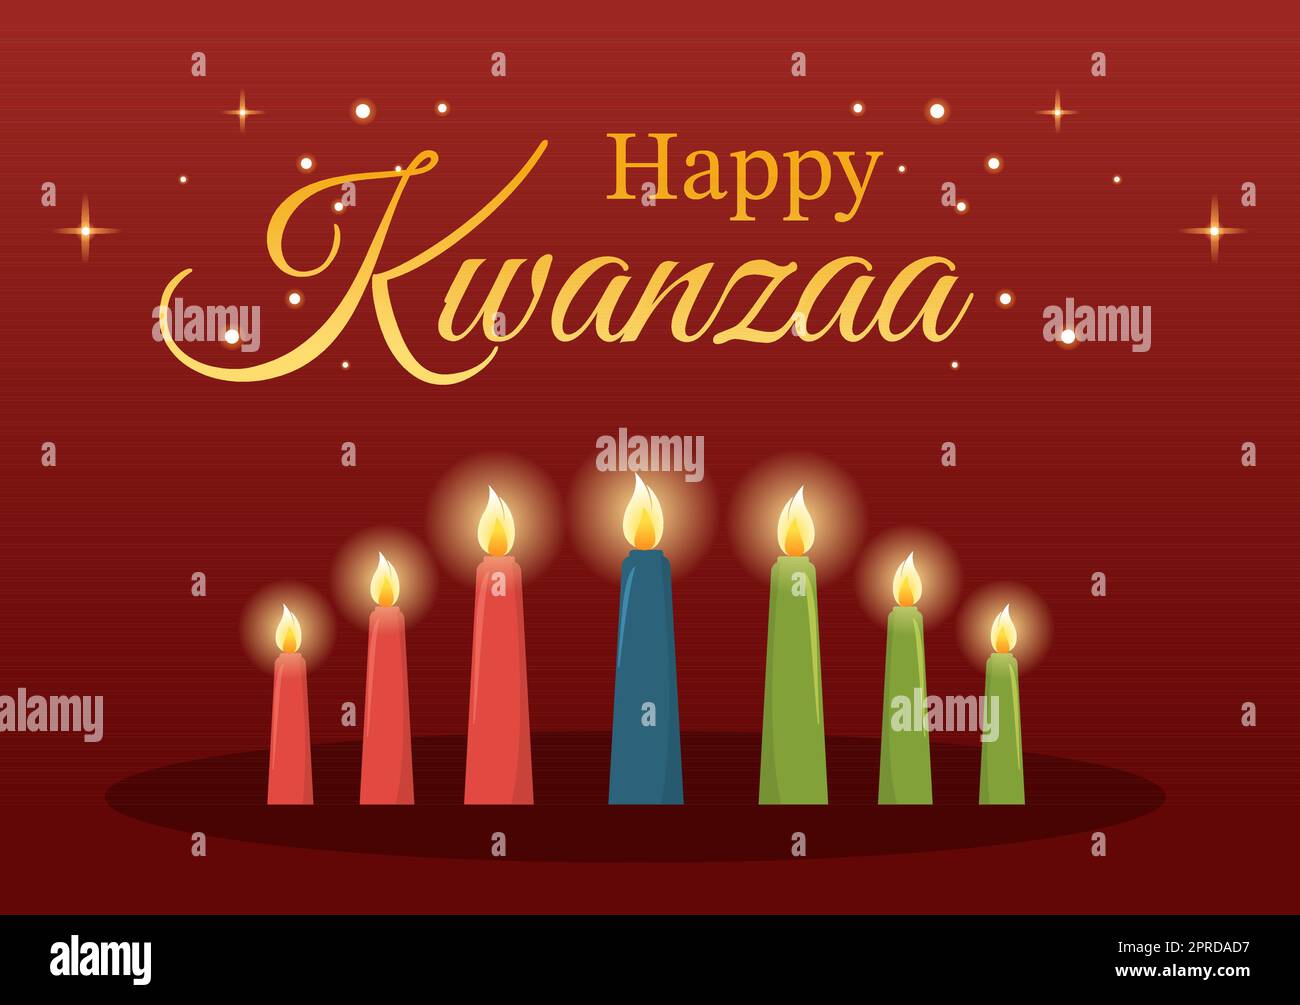 Happy Kwanzaa Holiday African Seamless Pattern Design with Festival Style  Element on Template Hand Drawn Cartoon Flat Illustration Stock Photo - Alamy